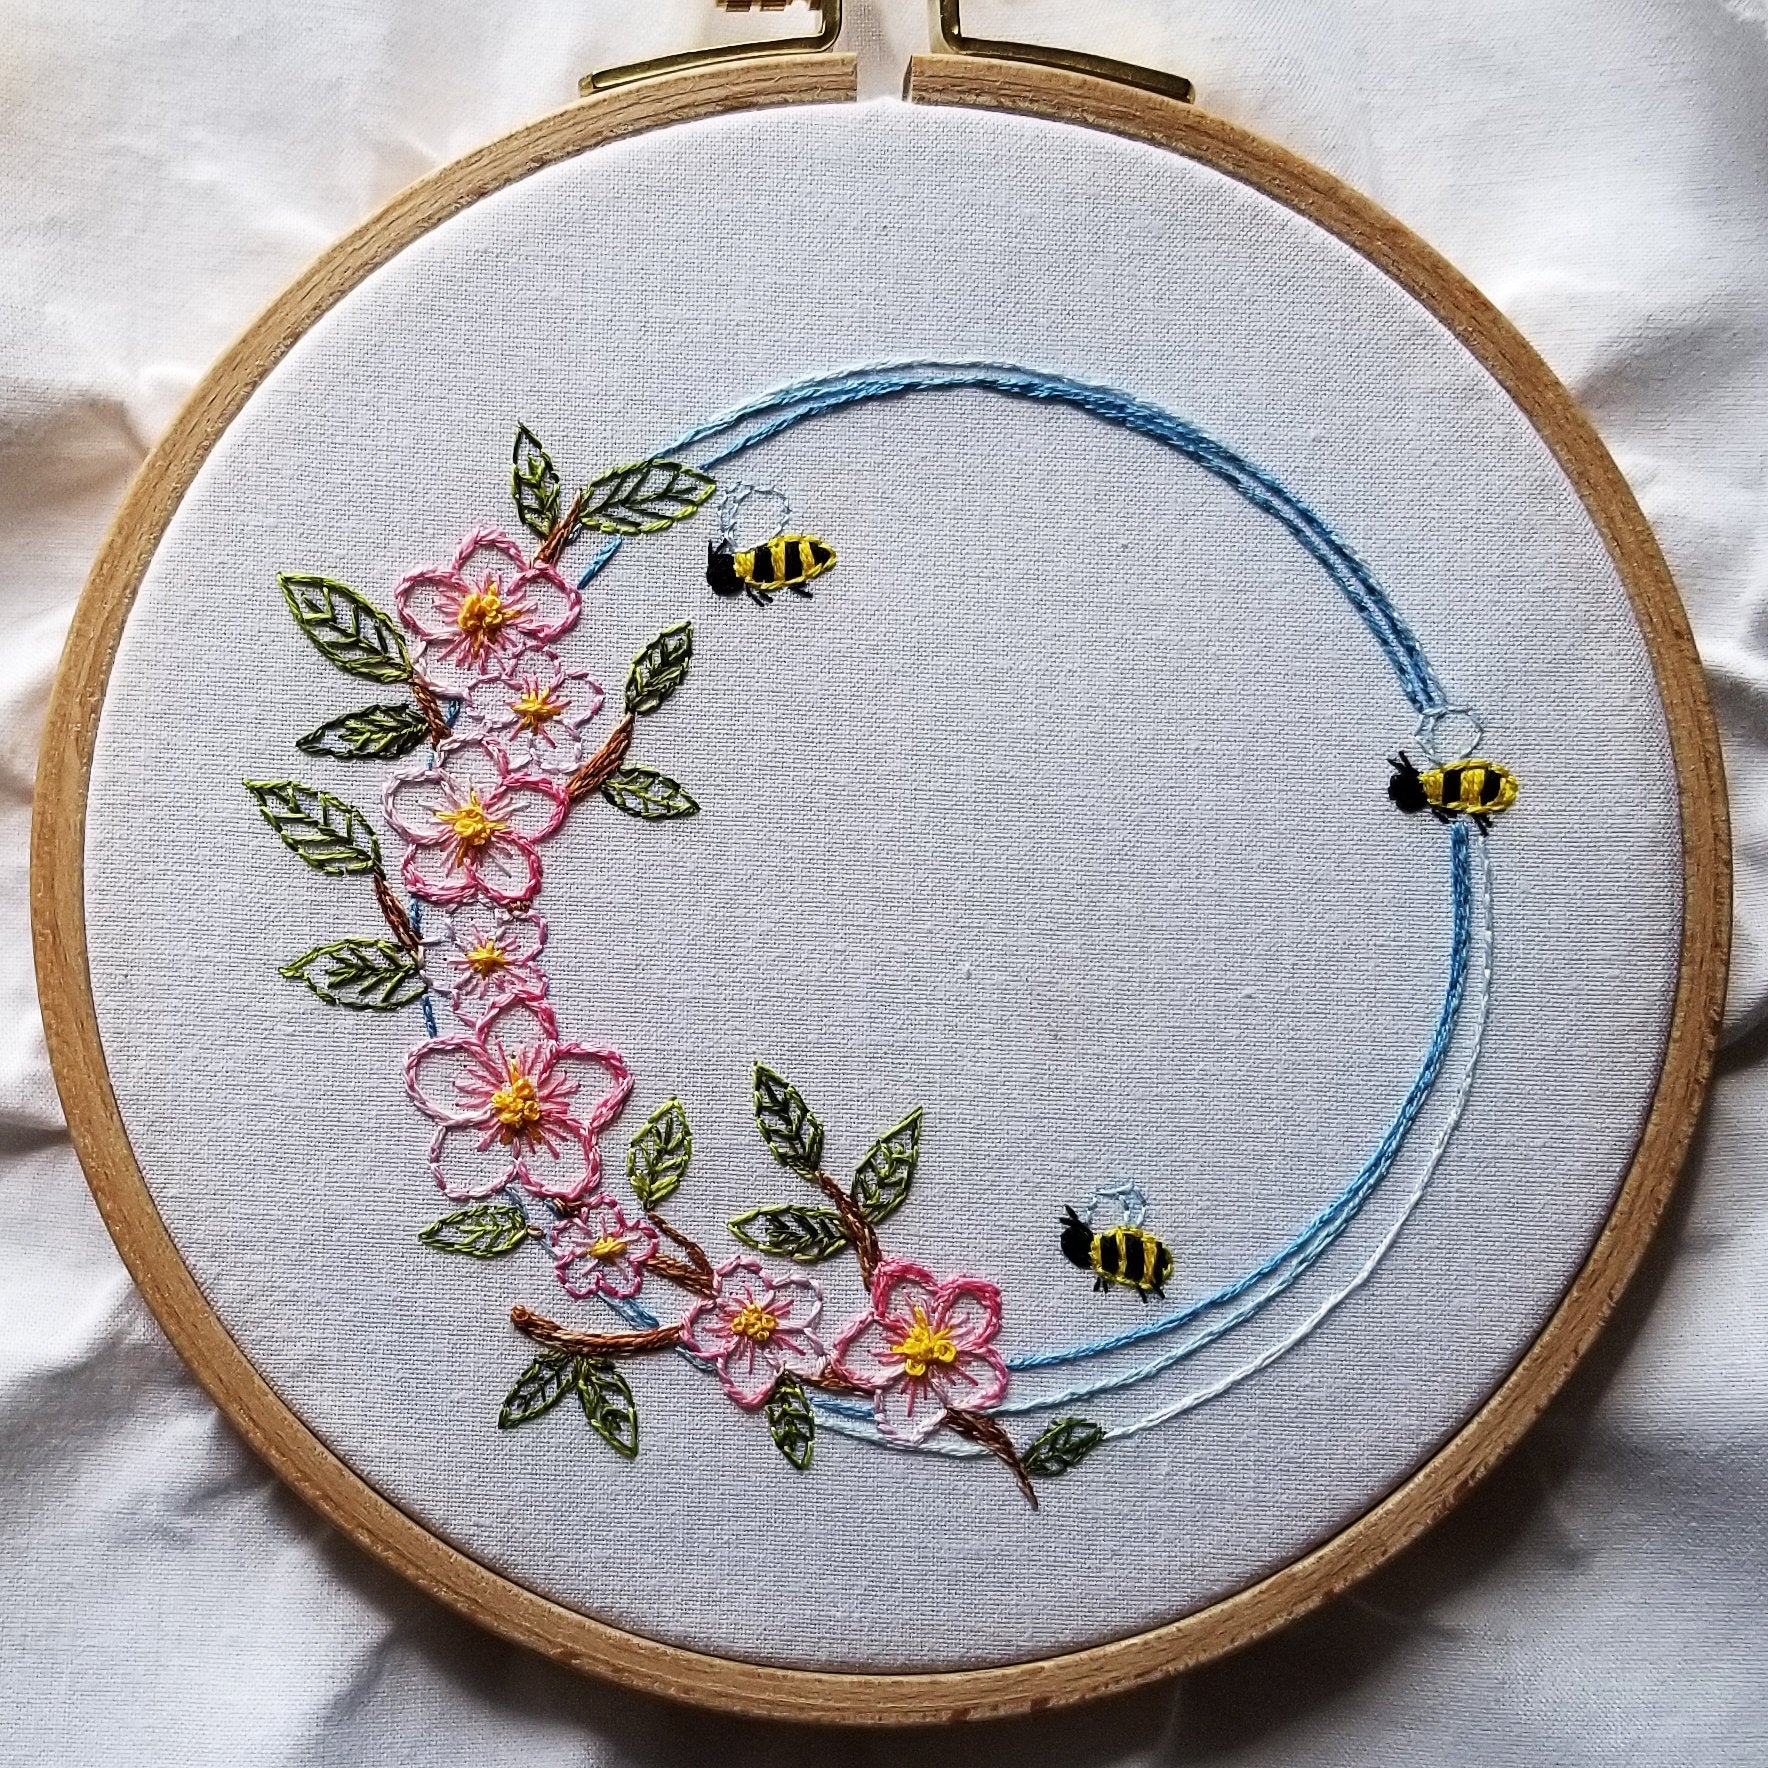 Kit - Apple Blossoms & Honey Bees Hand Embroidery Kit - Beginner Embro -  Wildflower Fox Crafts